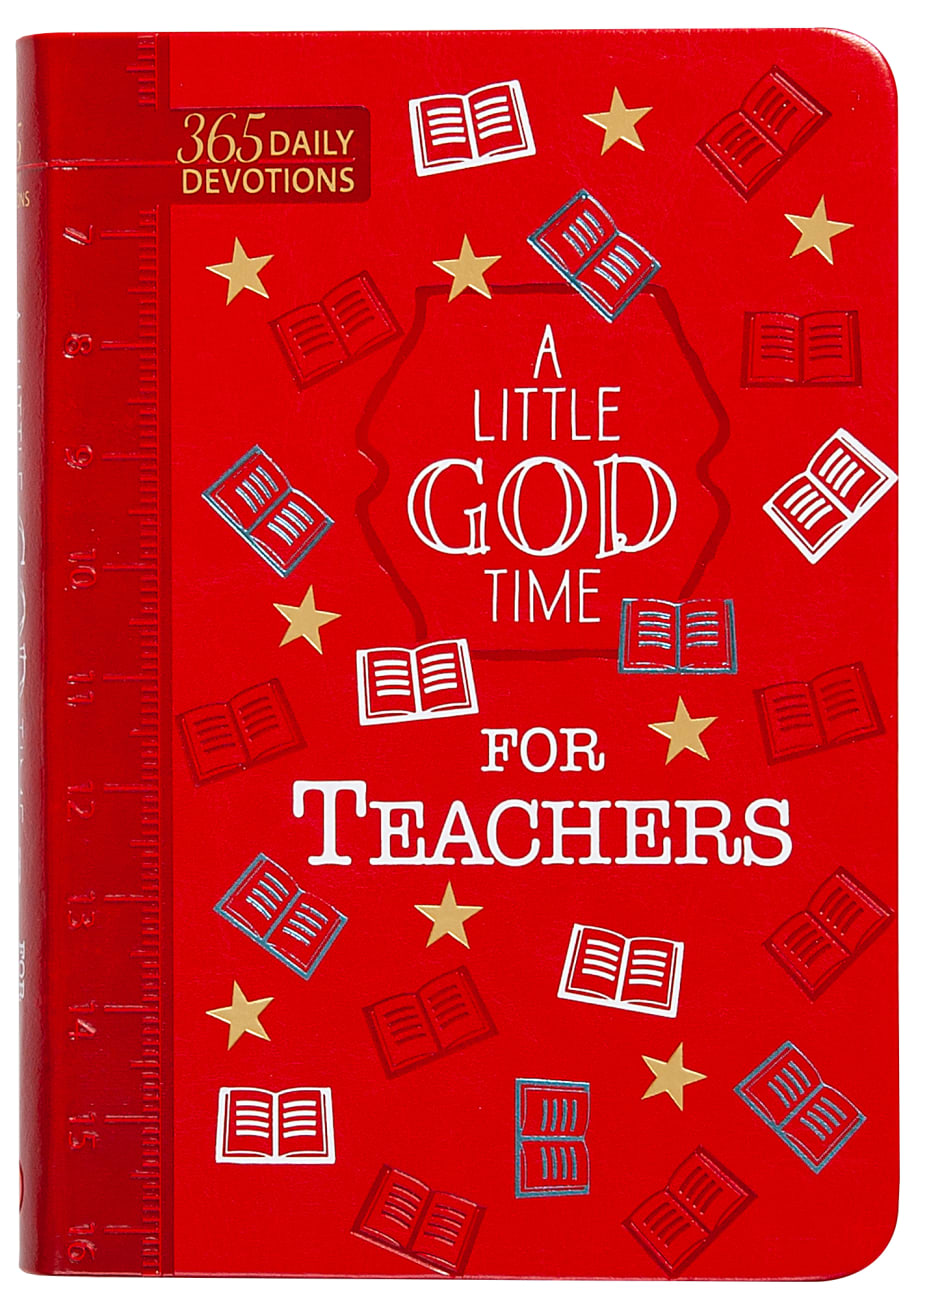 A Little God Time For Teachers: 365 Daily Devotions Imitation Leather